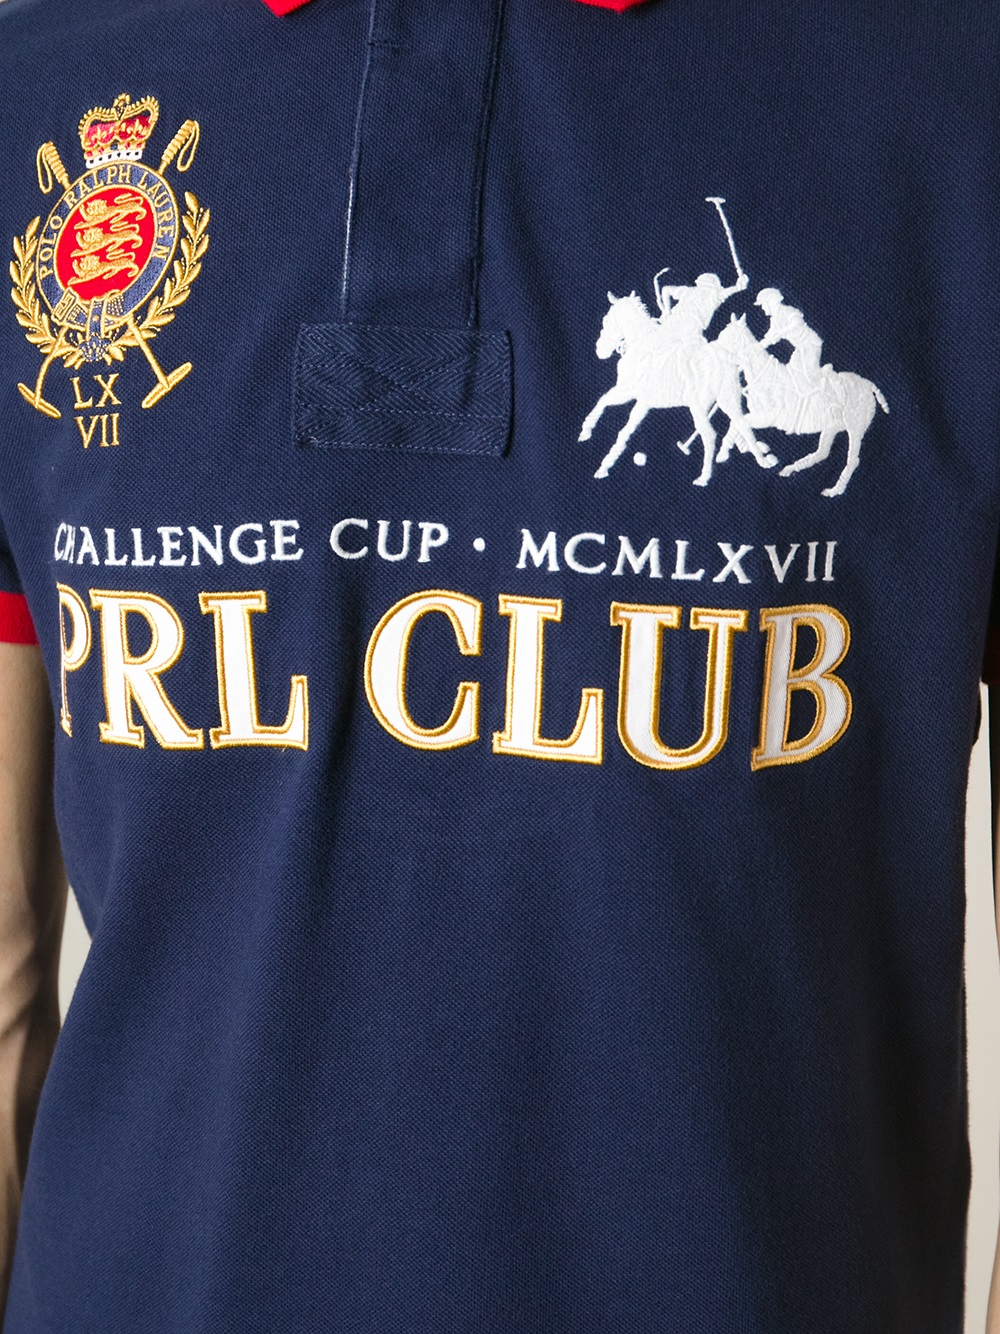 Polo Ralph Lauren Prl Club Polo Shirt in Blue for Men | Lyst